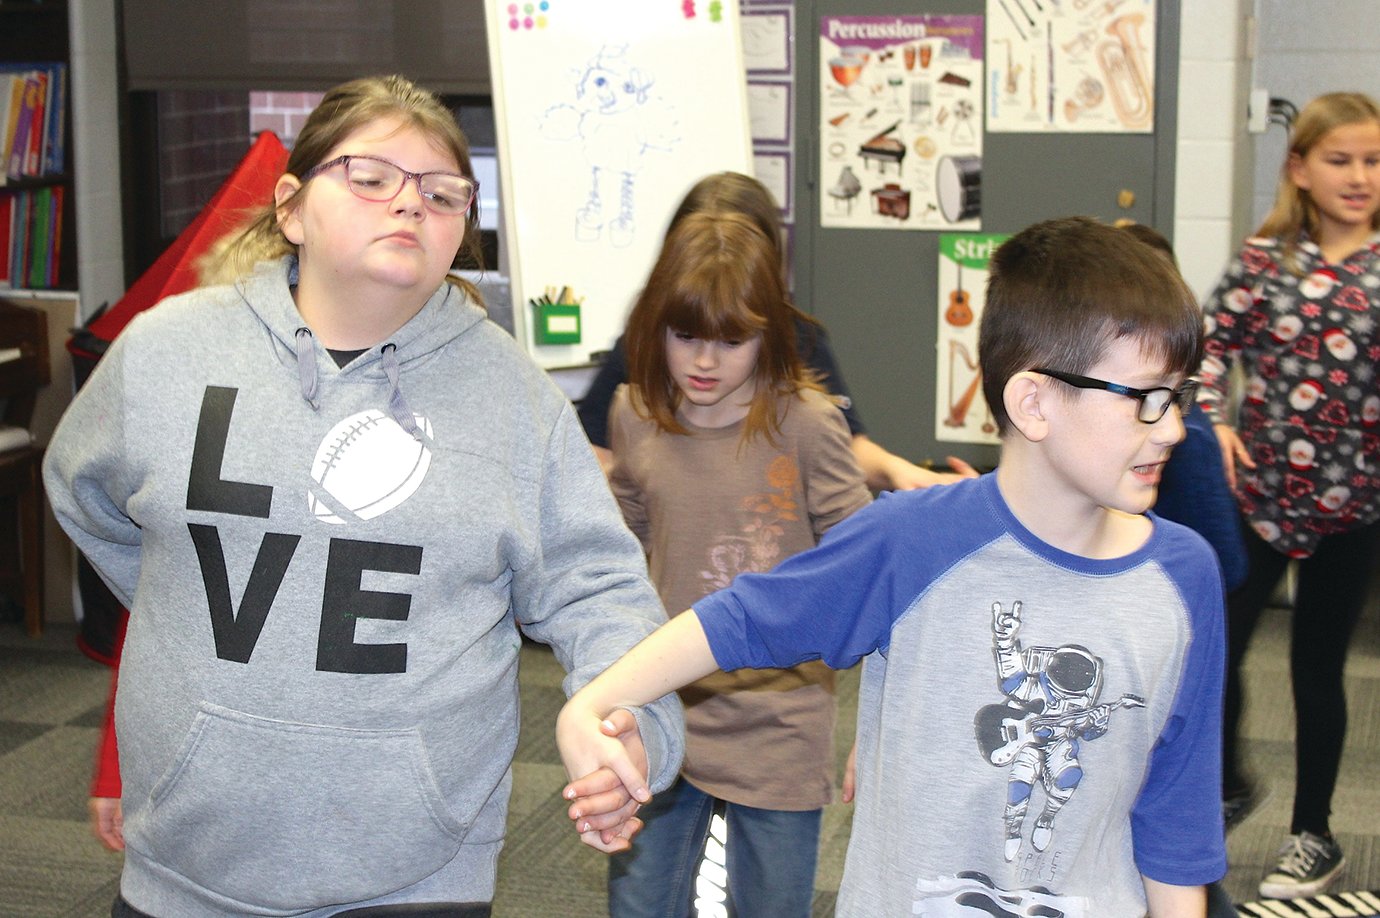 Chloee Sessum, left, and Dawson Jones make their way around a folk-style dancing circle during Jennifer Ellingwood's music class at Ladoga Elementary.